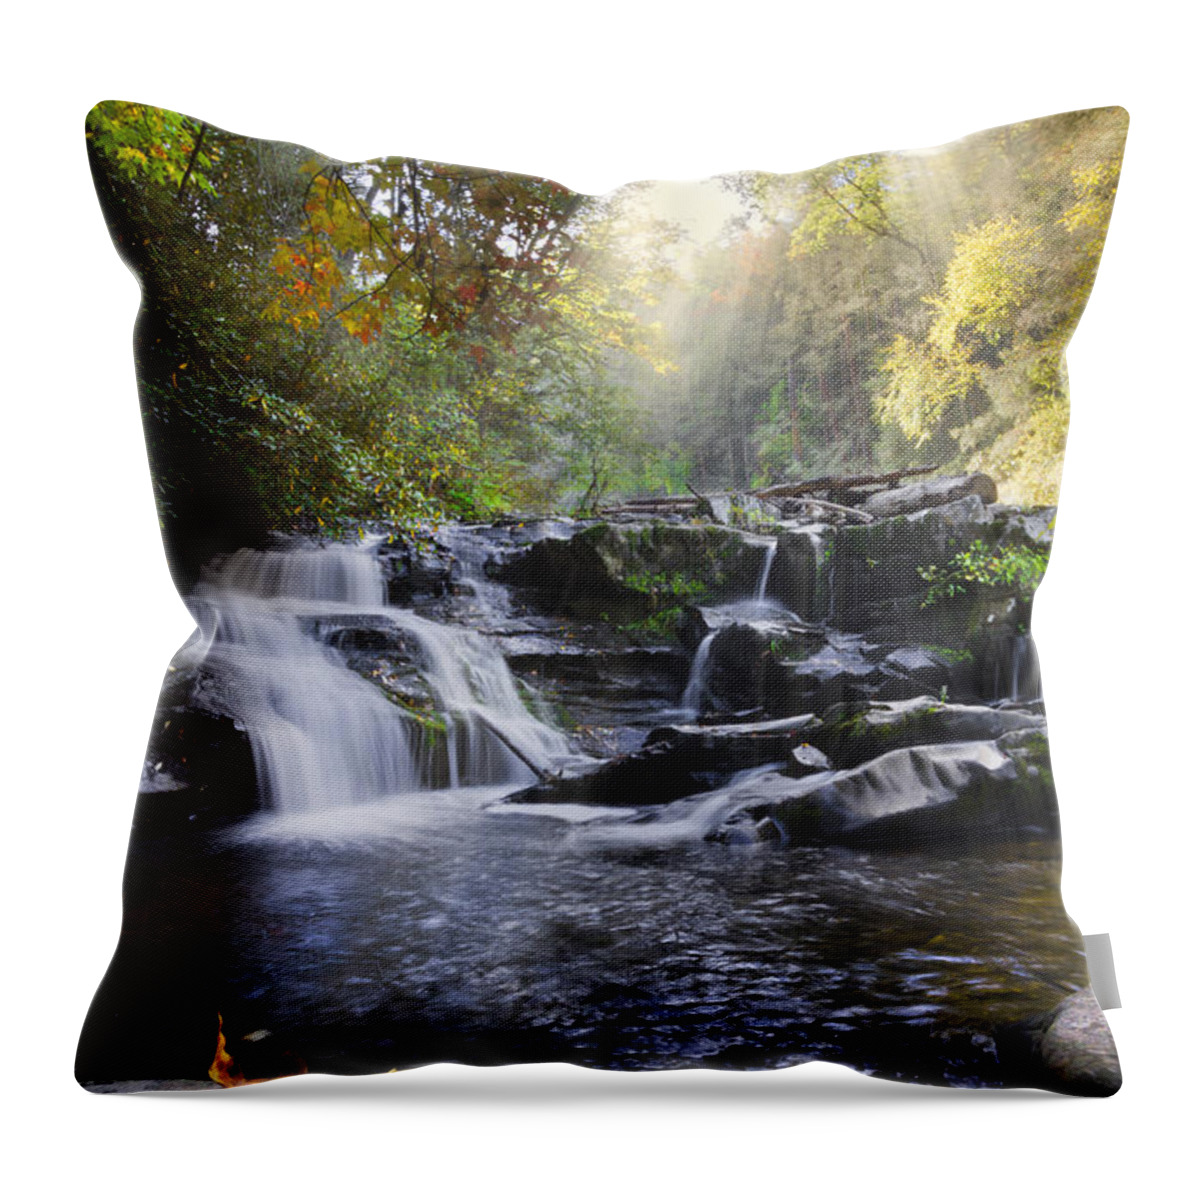 Appalachia Throw Pillow featuring the photograph Heaven's Light by Debra and Dave Vanderlaan